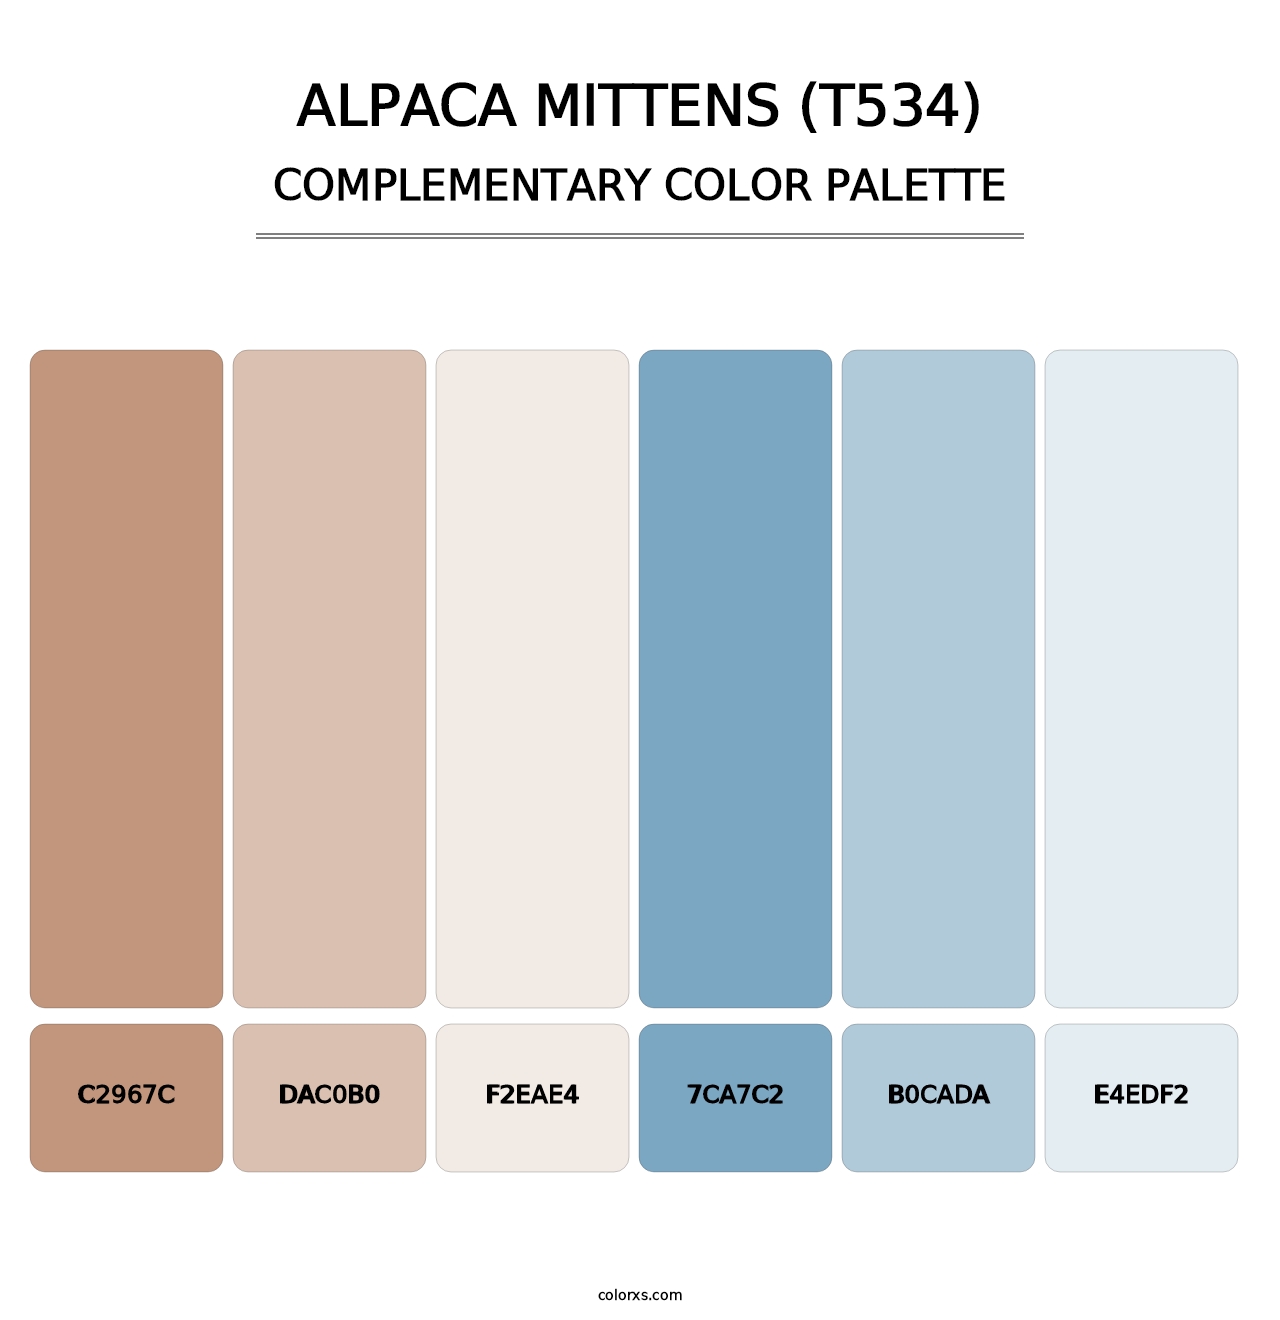 Alpaca Mittens (T534) - Complementary Color Palette